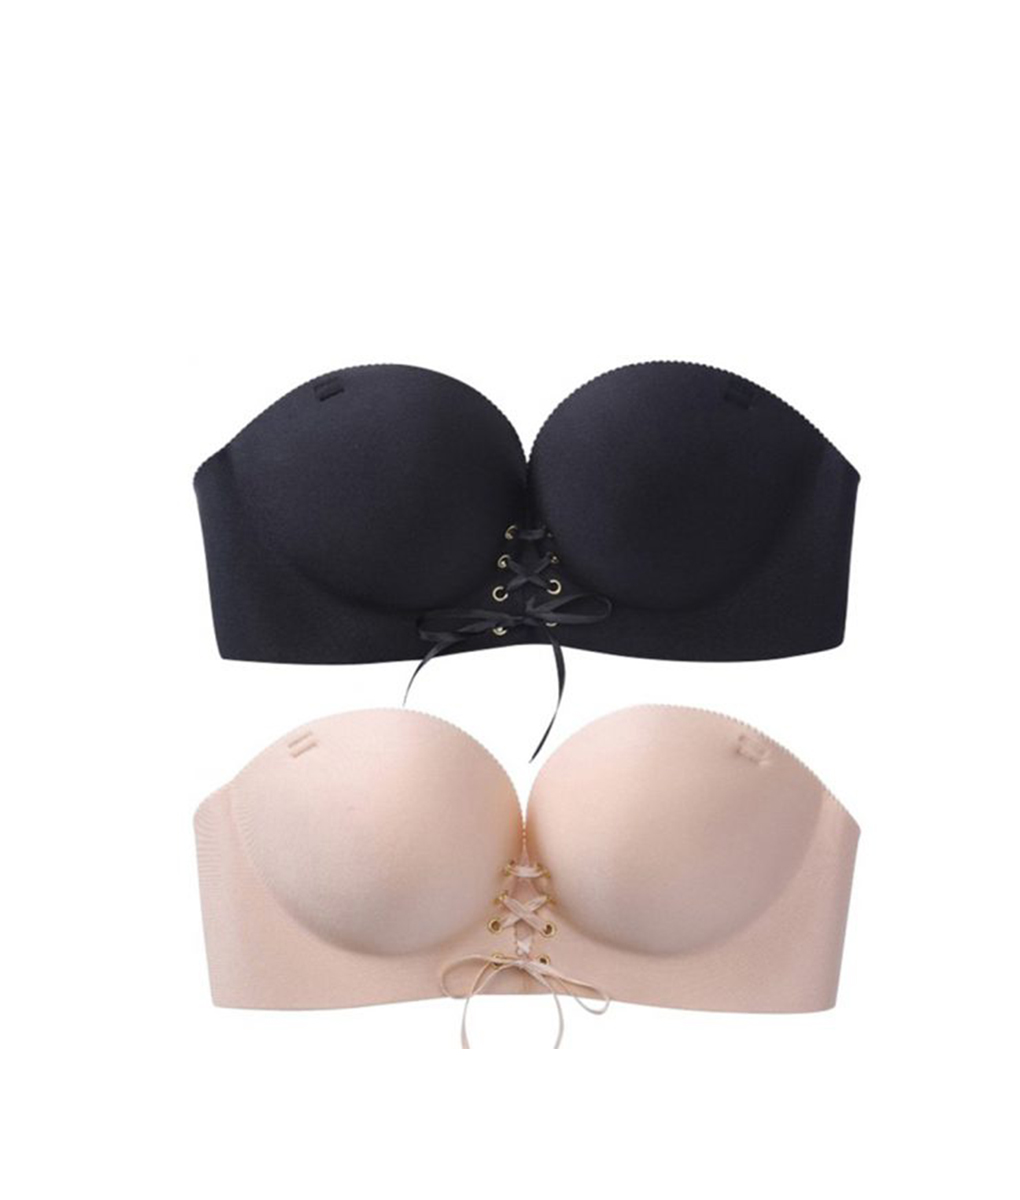 where can i buy push up bras